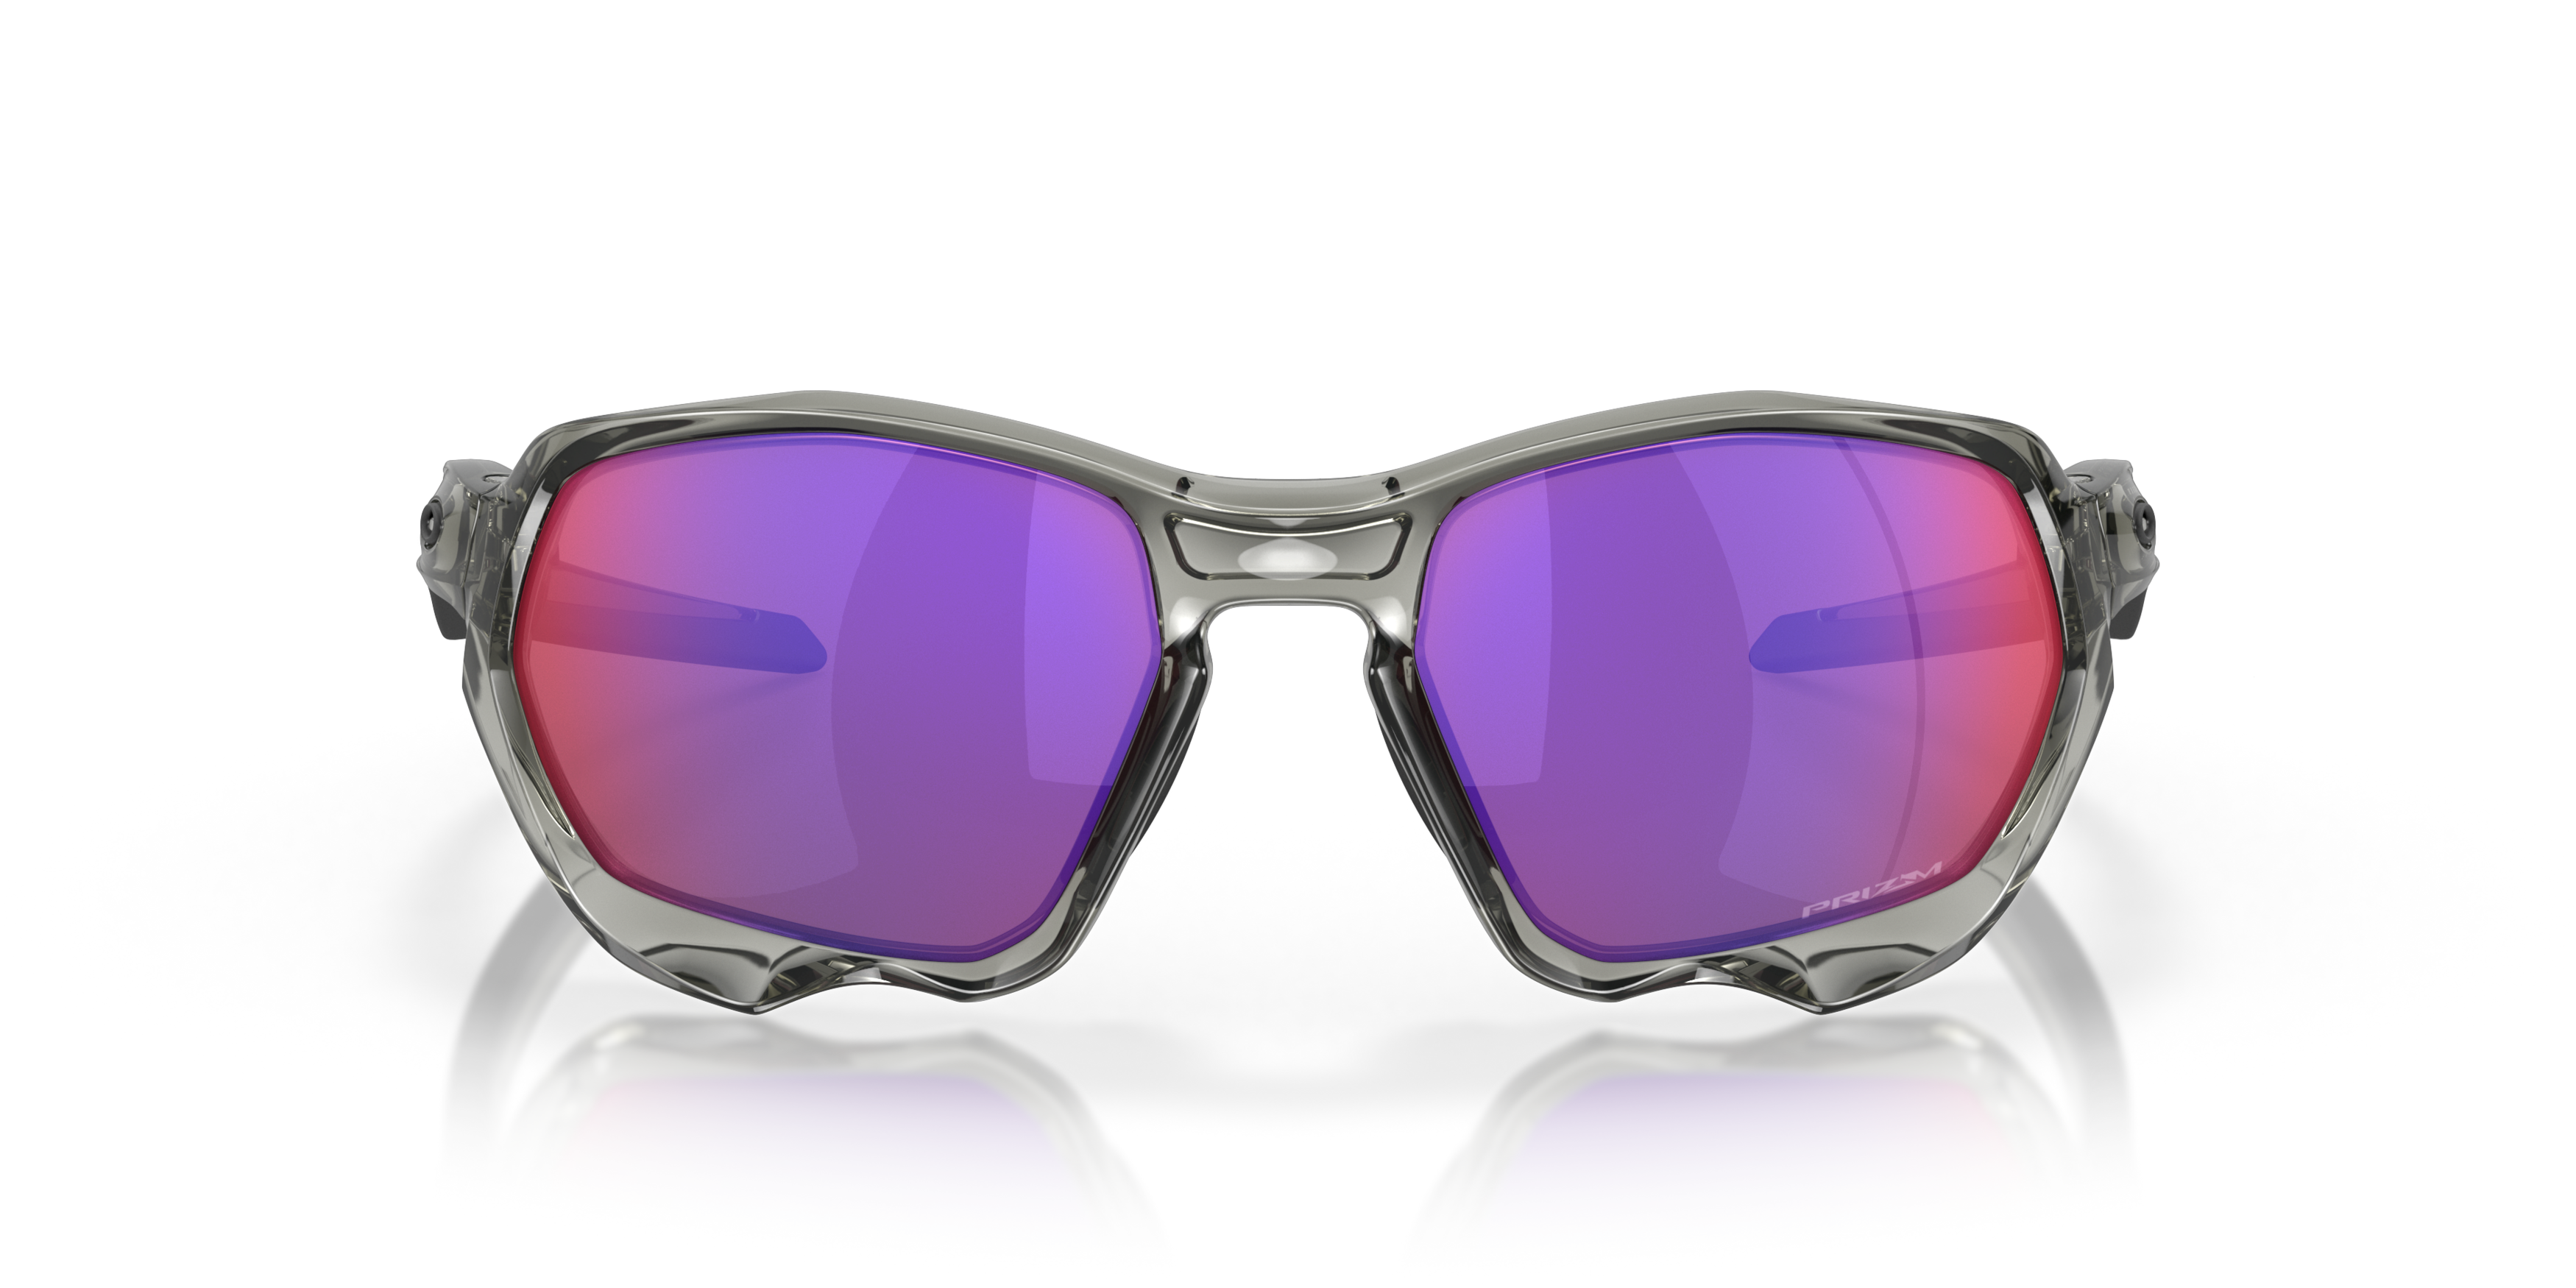 [products.image.front] Oakley OO9019 901903